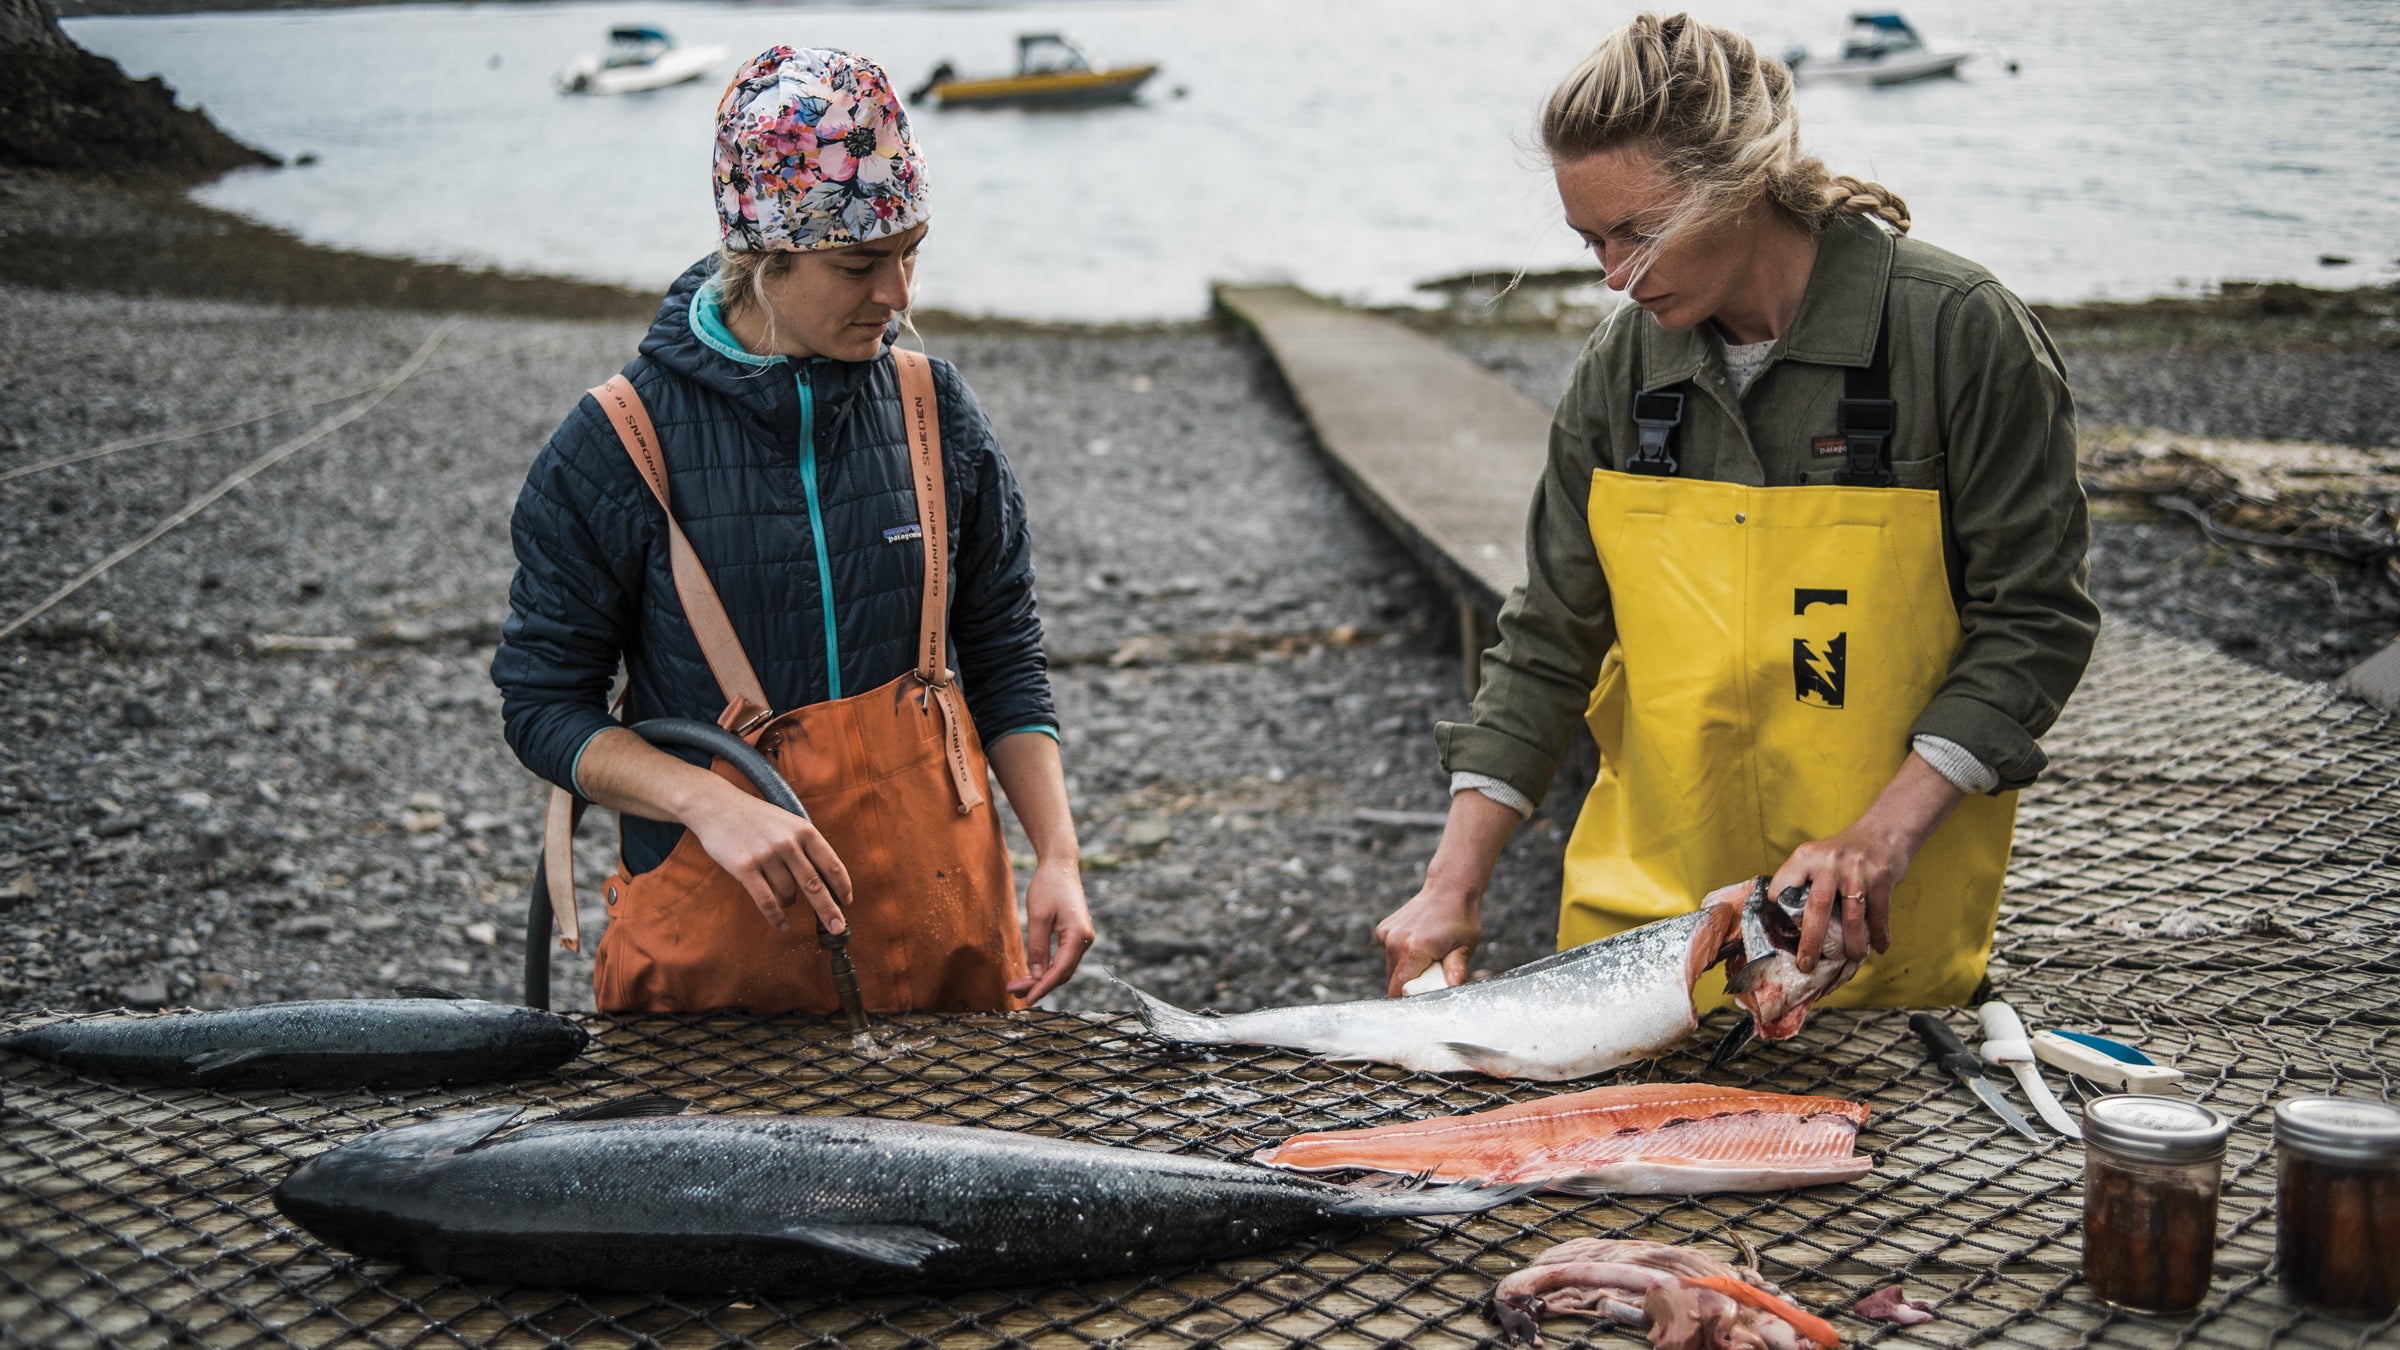 The Salmon Sisters Want to Teach You How to Cook Fish